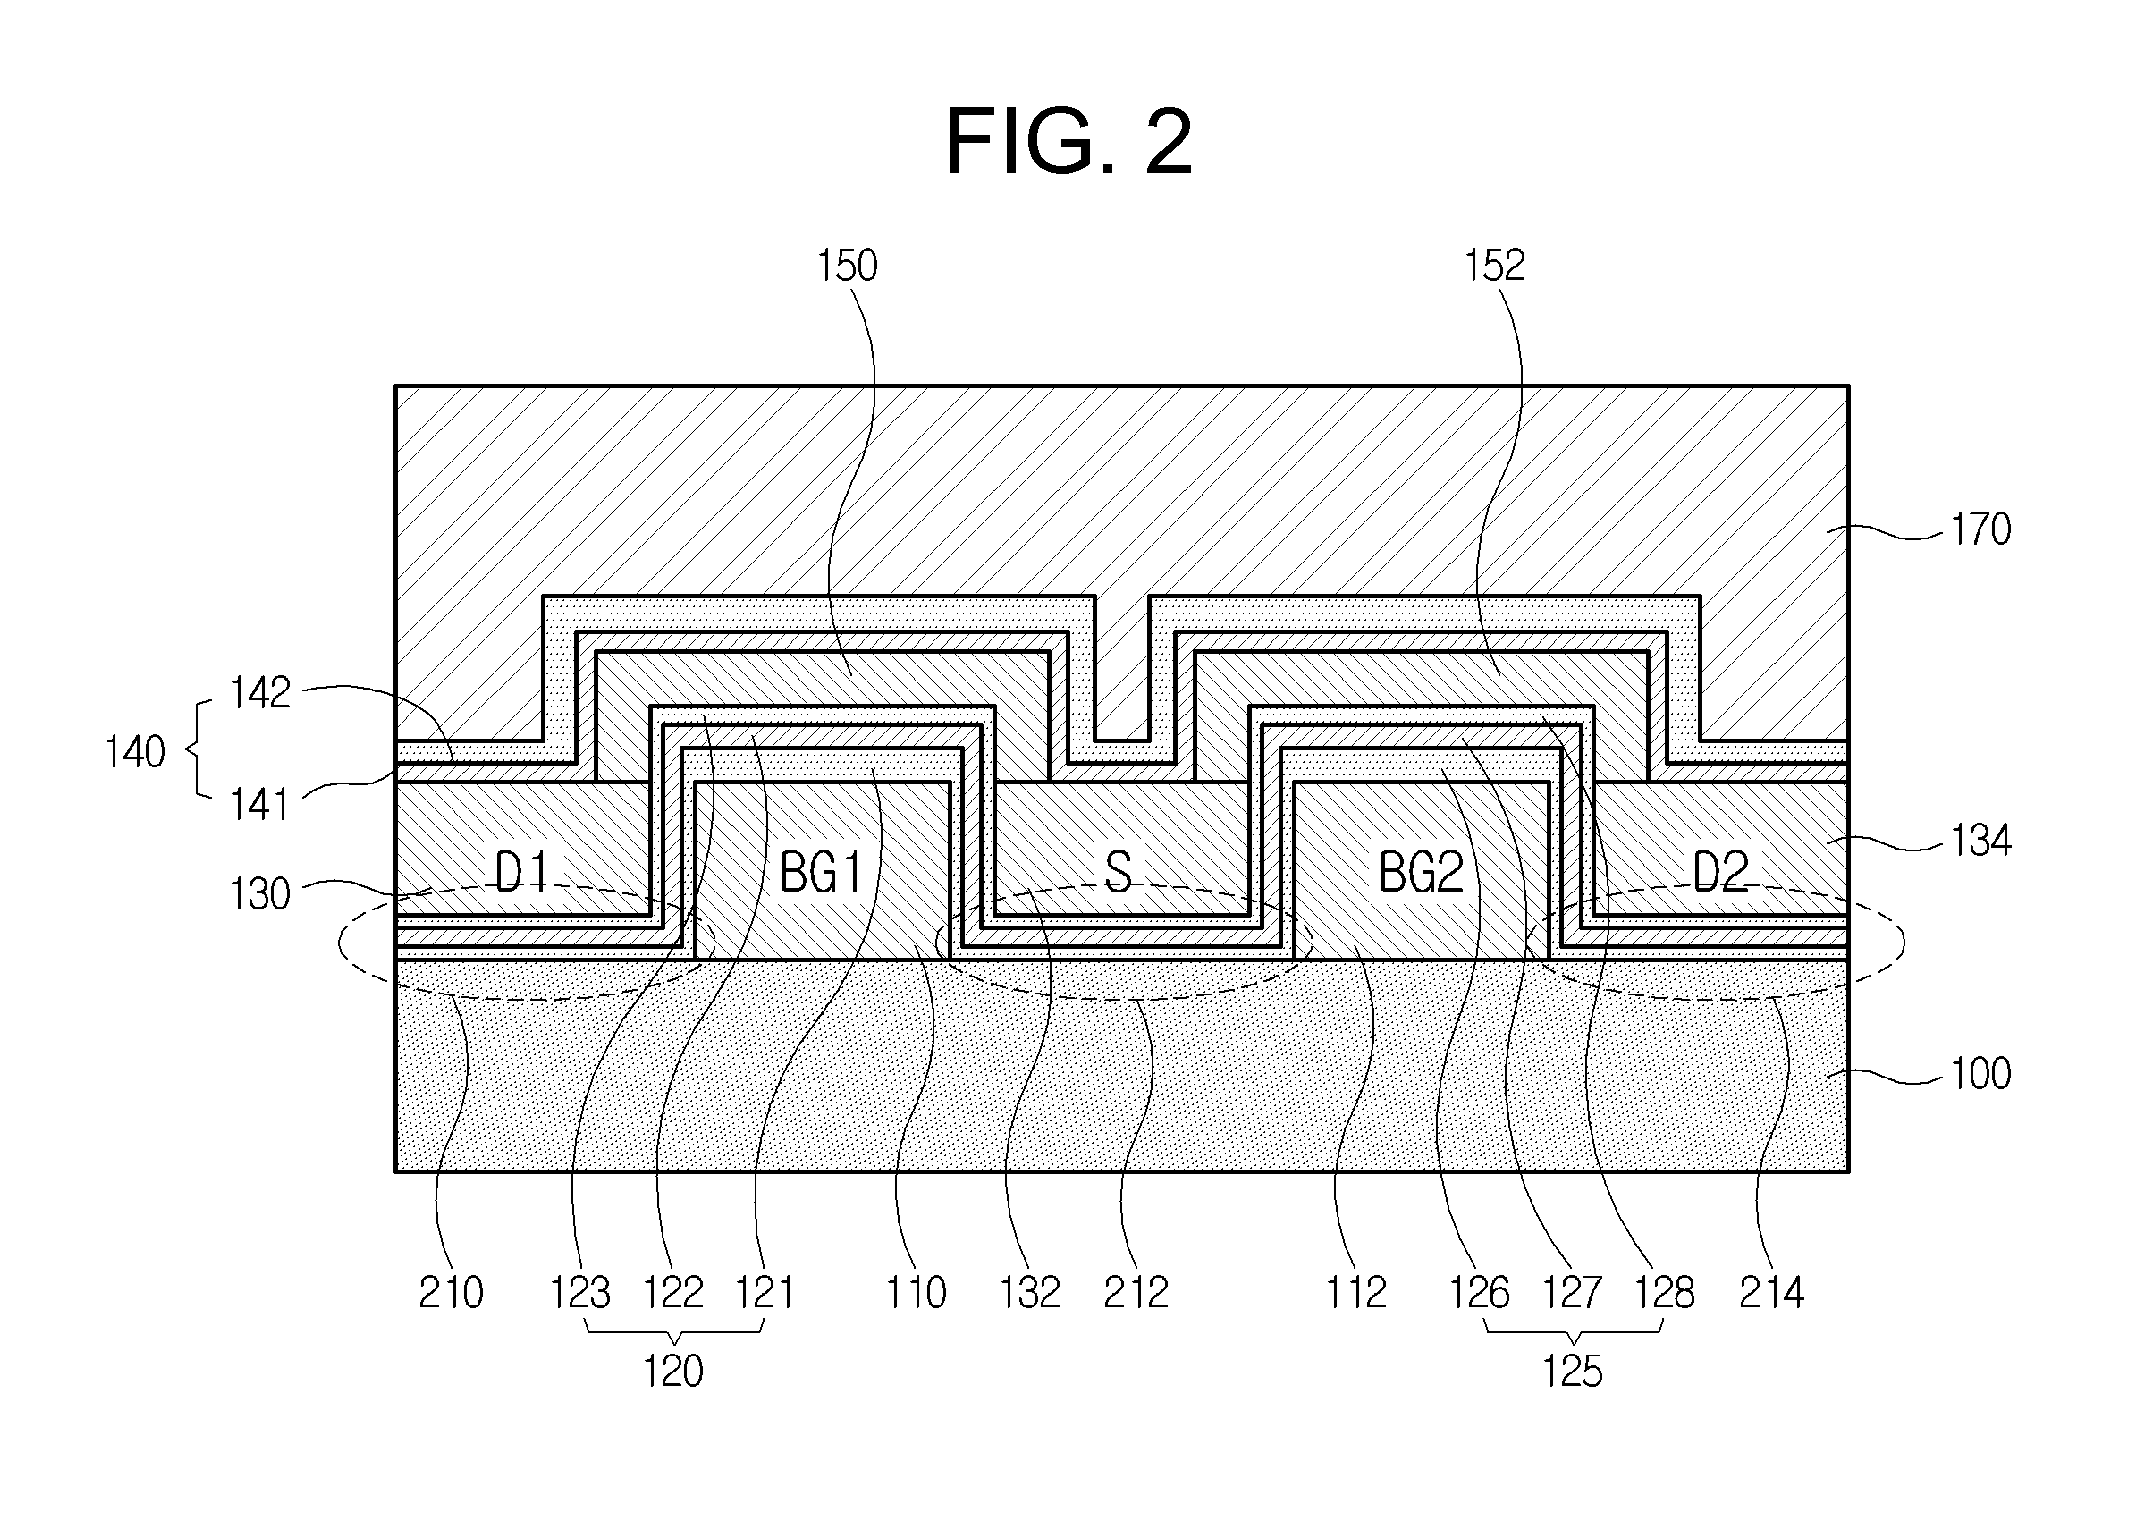 Neuromorphic device with excitatory and inhibitory functionalities